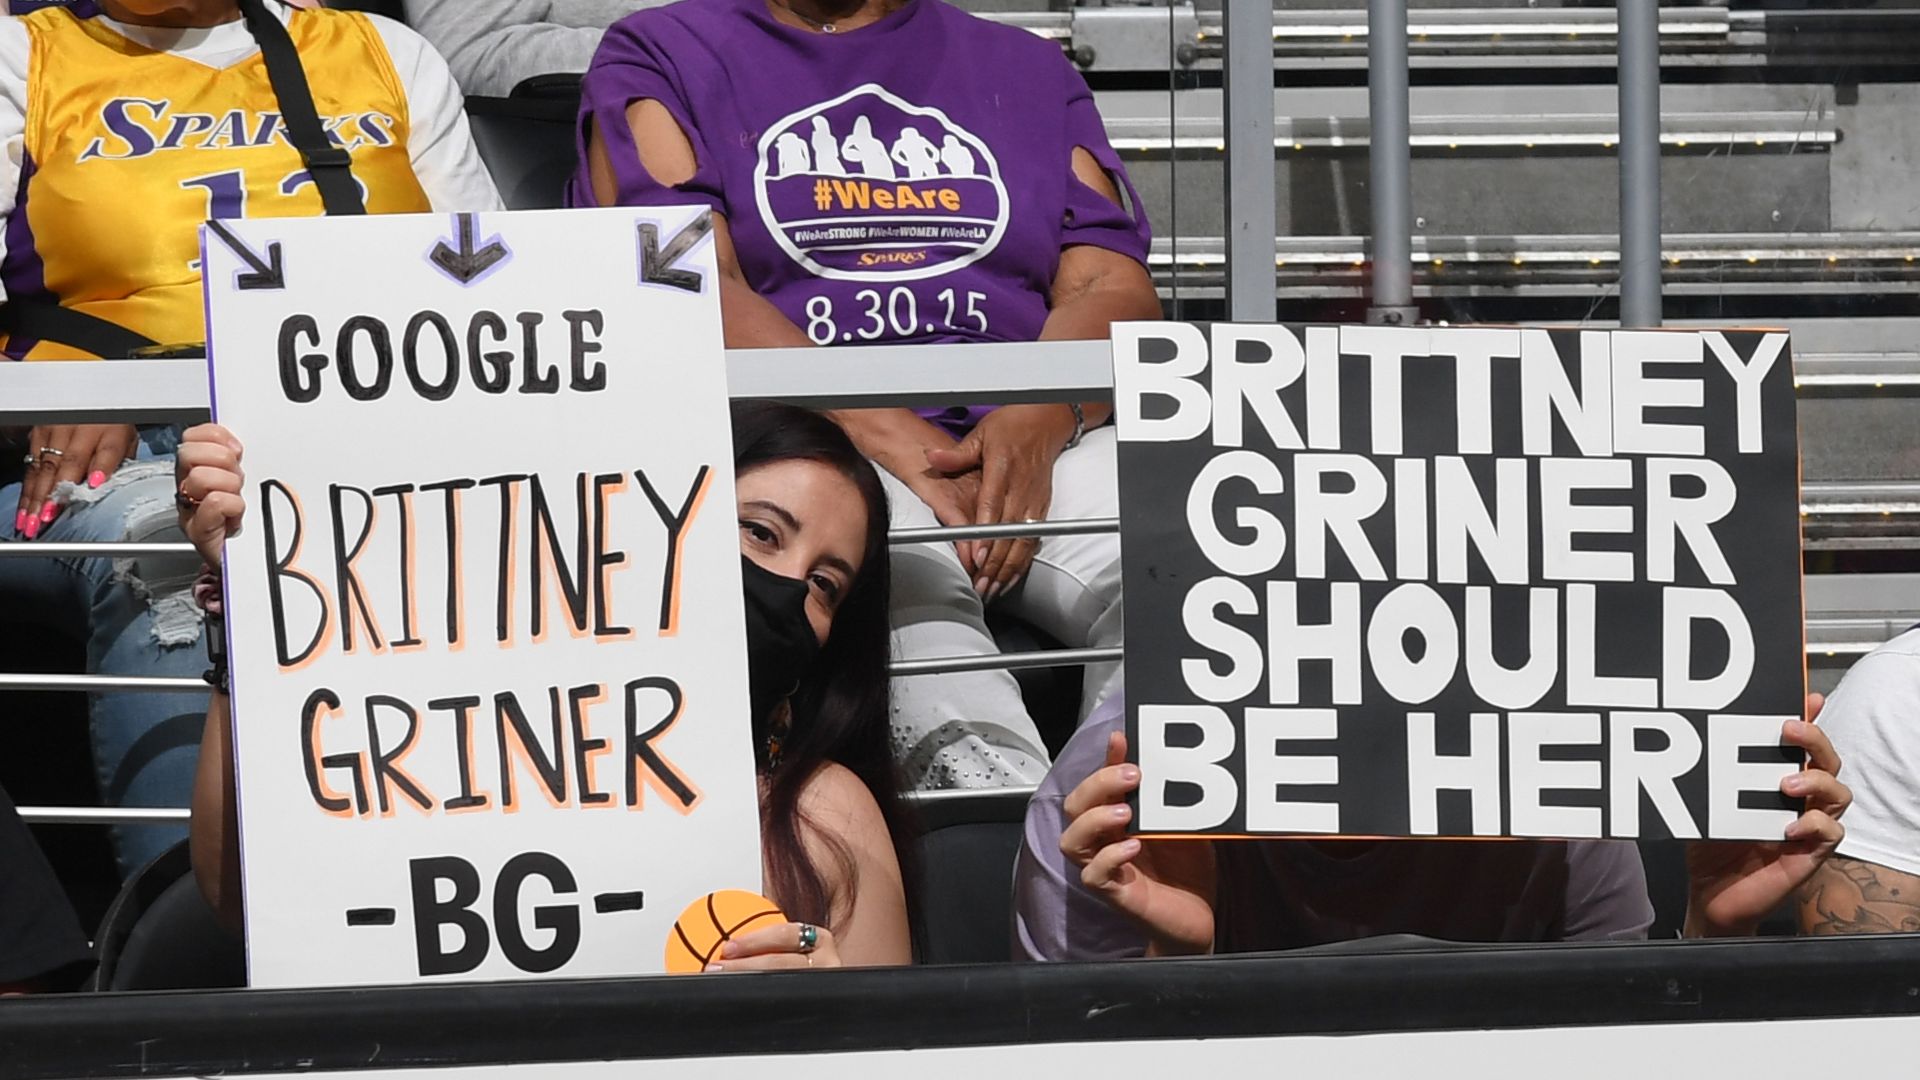 Fans hold signs supporting Brittney Griner.